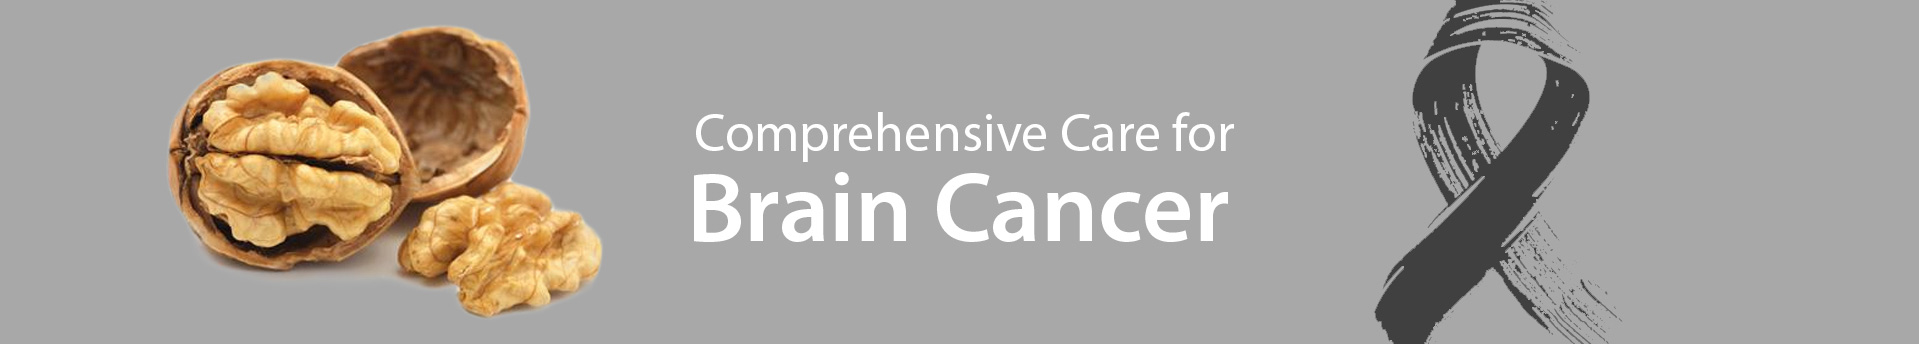 Medicaoncology brain Cancer